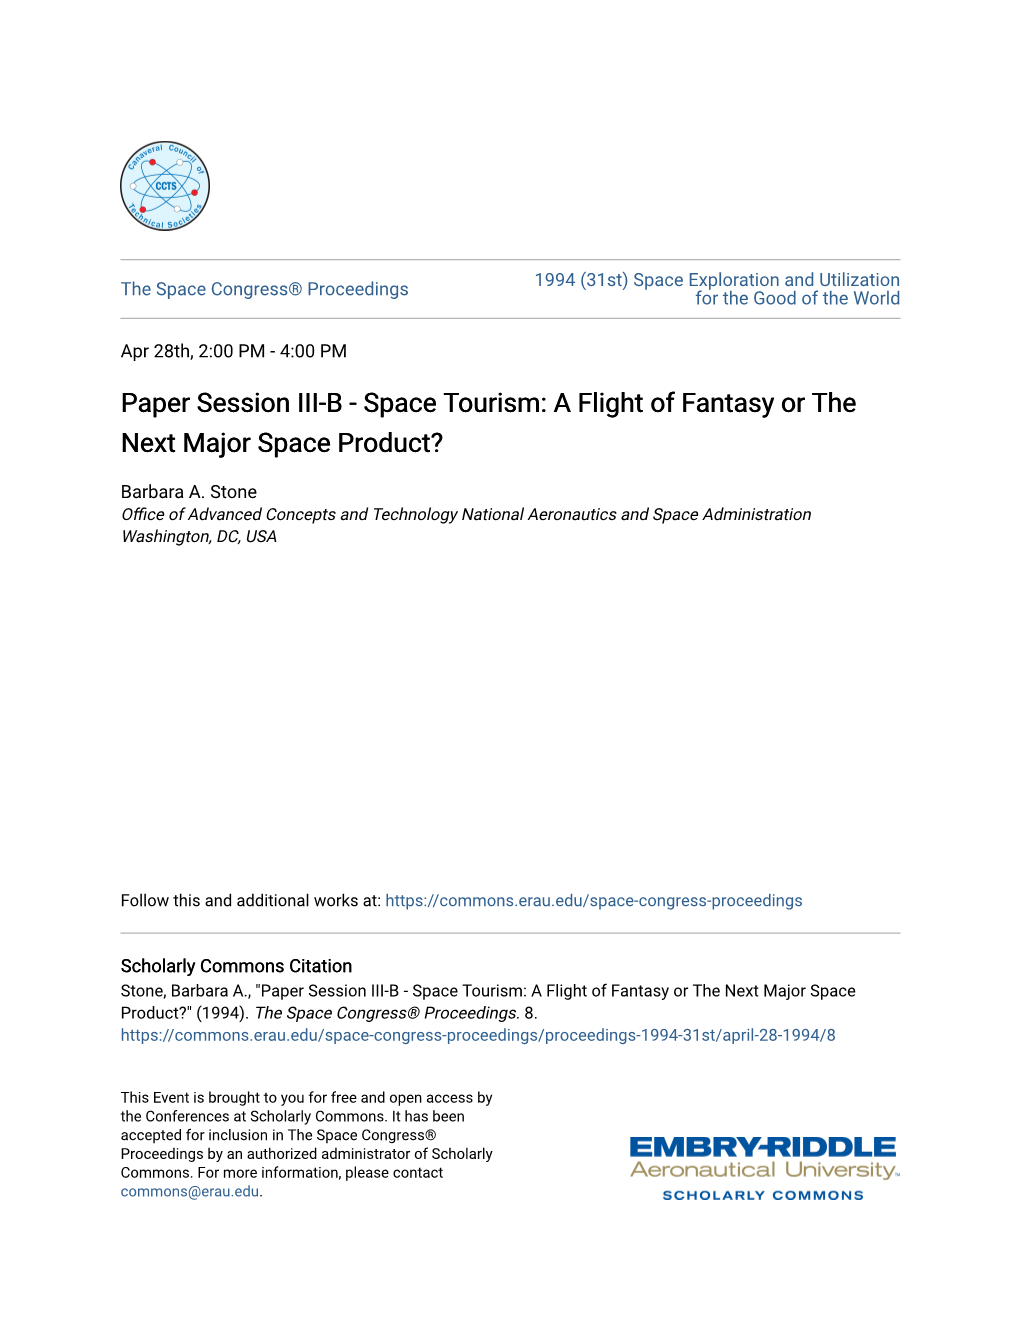 Paper Session III-B - Space Tourism: a Flight of Fantasy Or the Next Major Space Product?